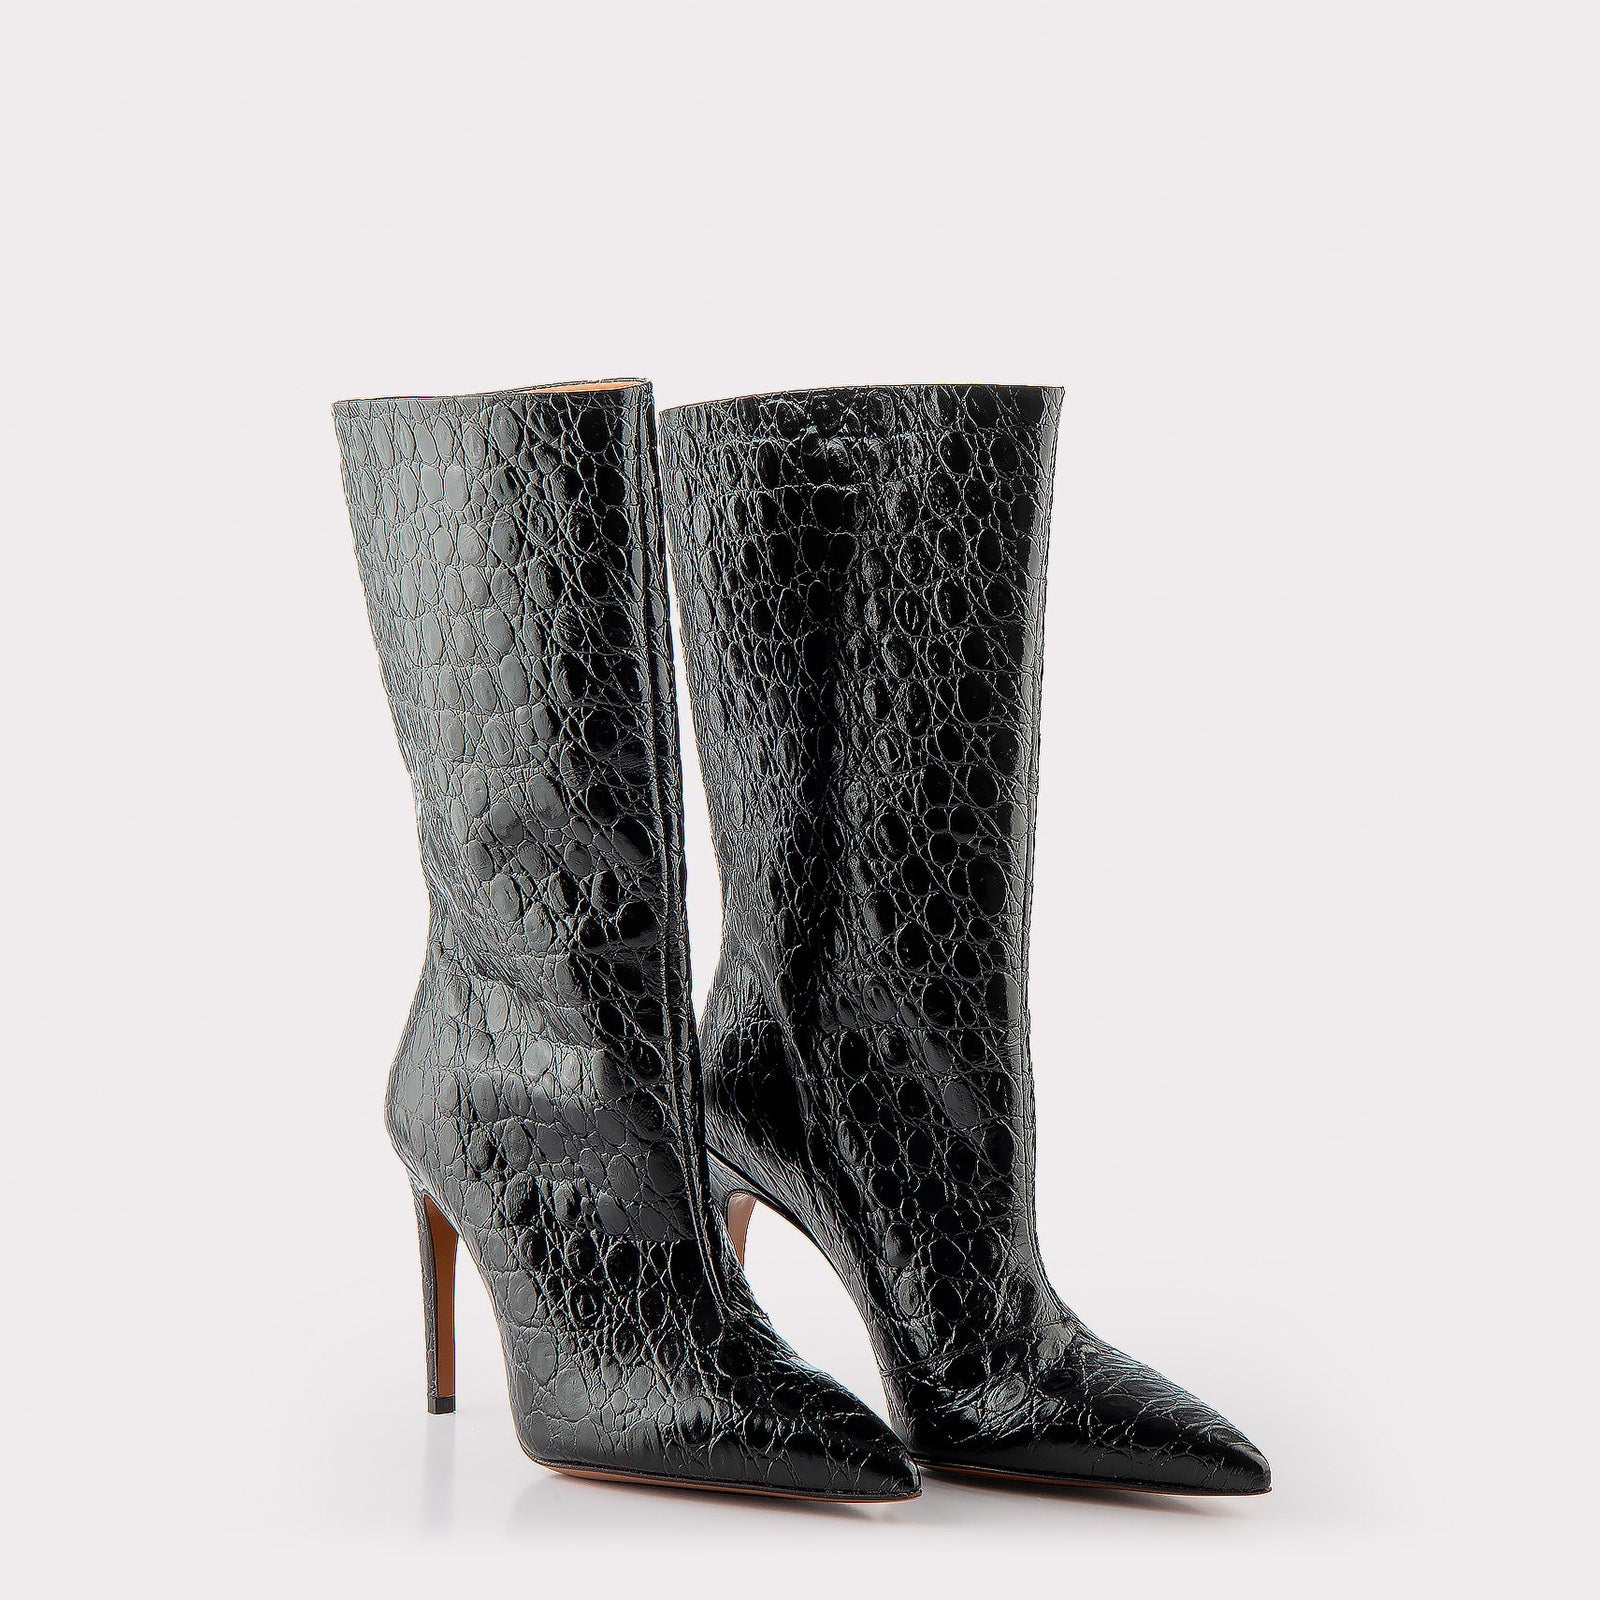 ANNIE 01 BLACK CROCO EMBOSSED LEATHER BOOTS